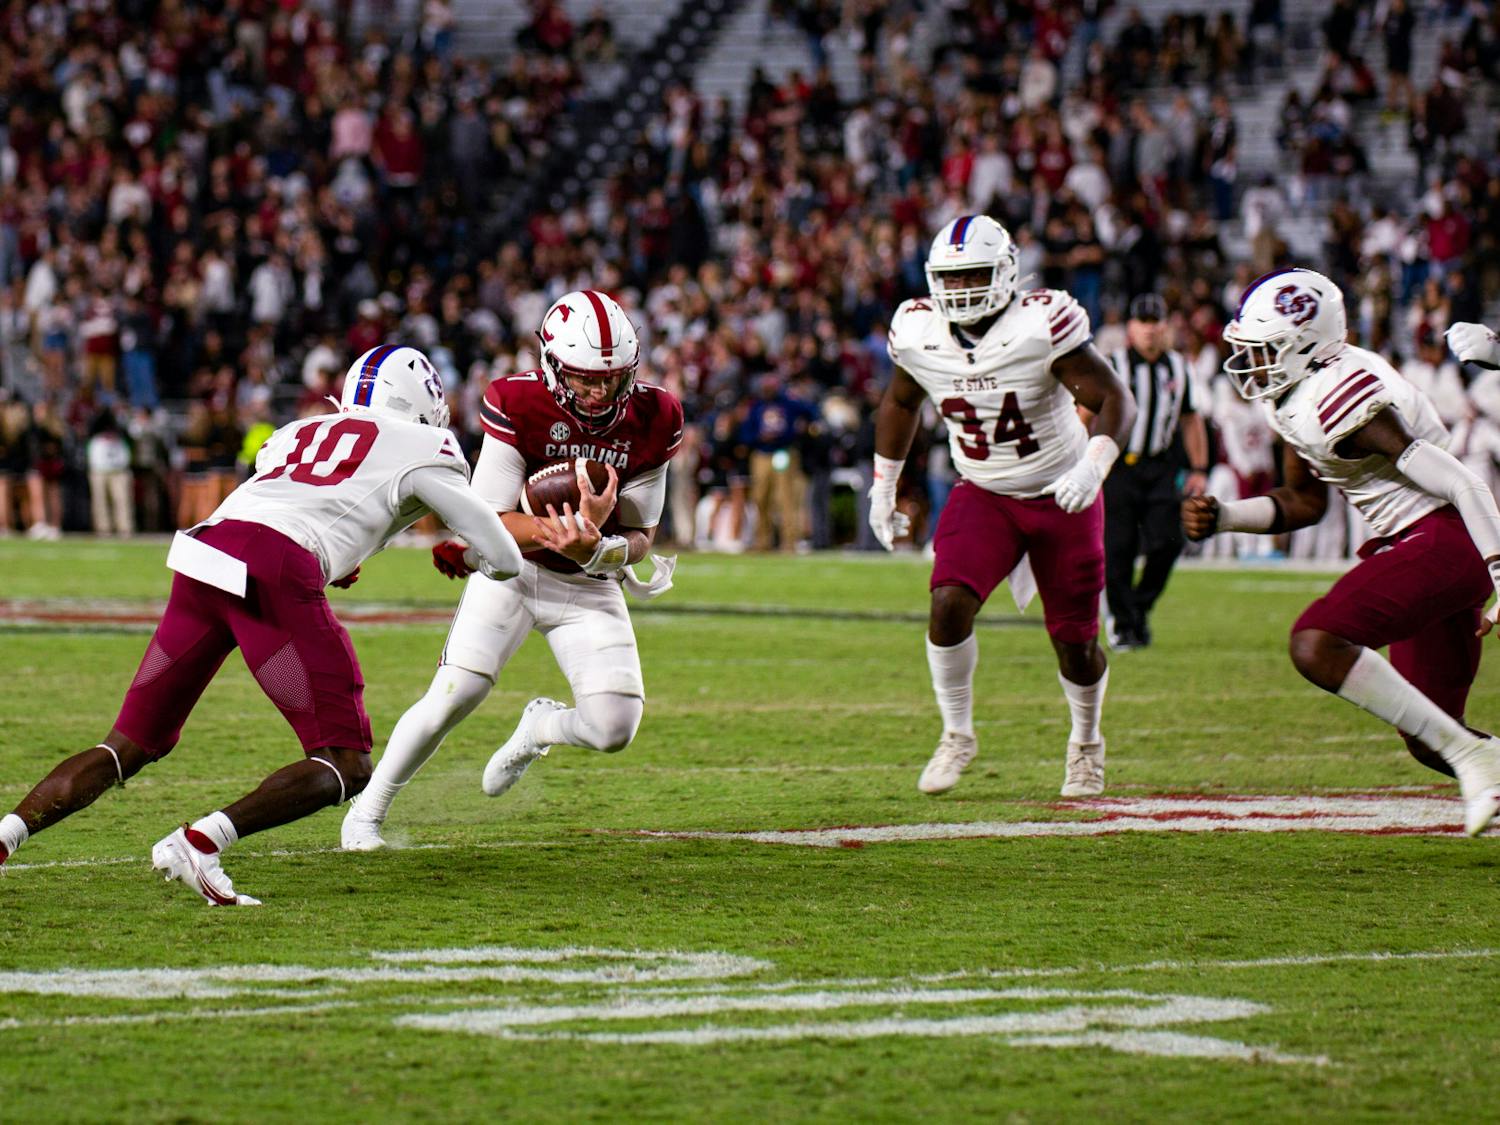 Redshirt junior quarterback Spencer Rattler makes a 6-yard rushing touchdown against S.C. State on Sept. 29, 2022. The Gamecocks defeated S.C. State 50-10.